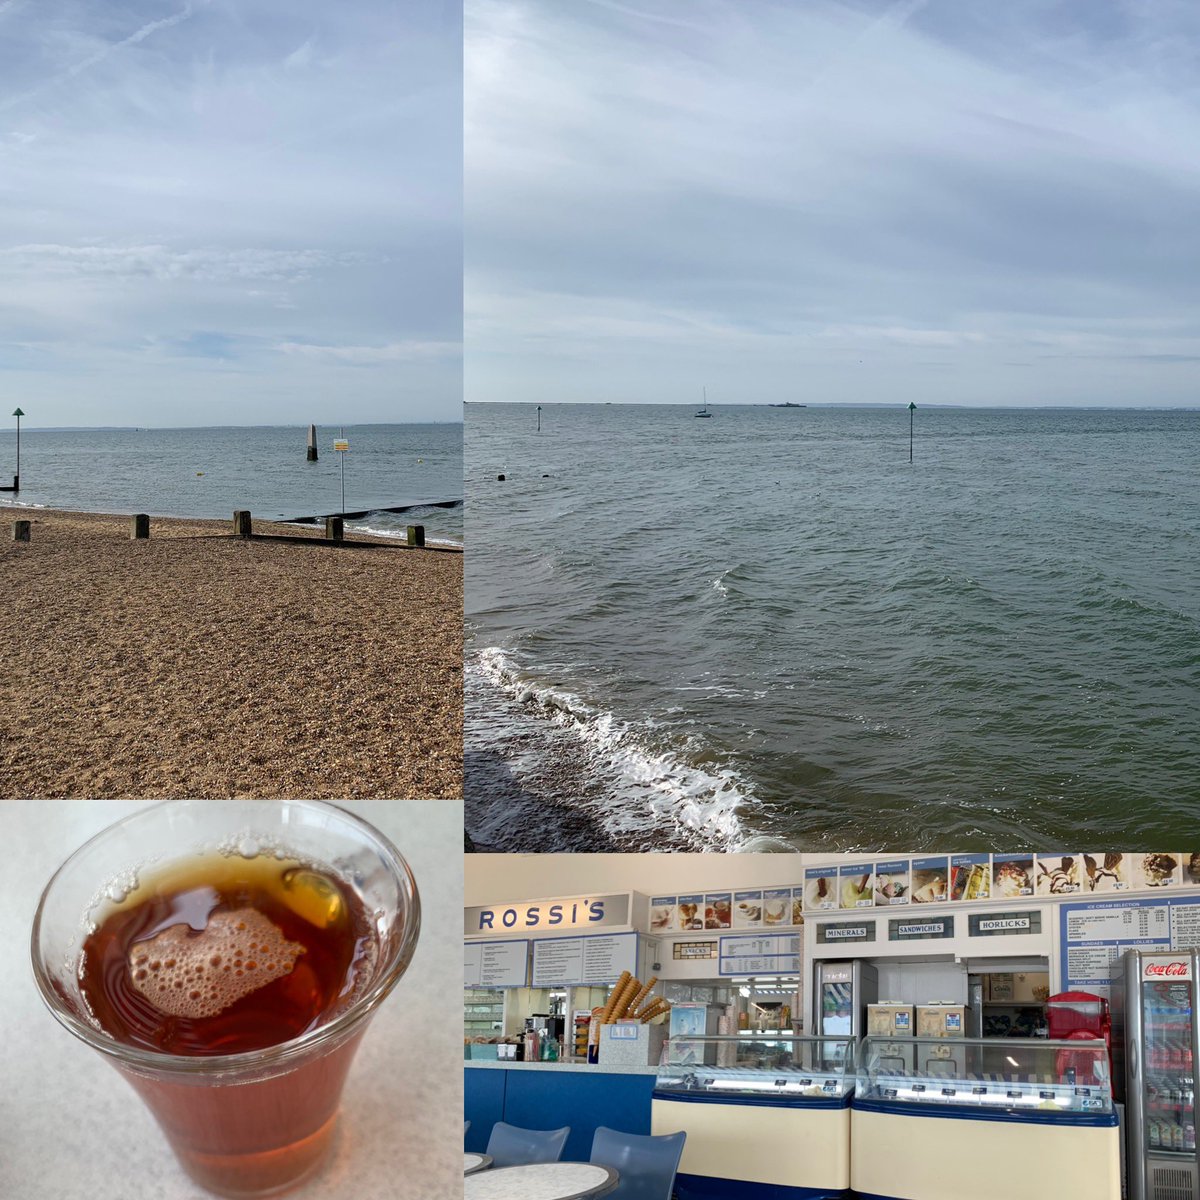 Lovely start to the day - seafront stroll and cuppa in #rossis #southendseafront